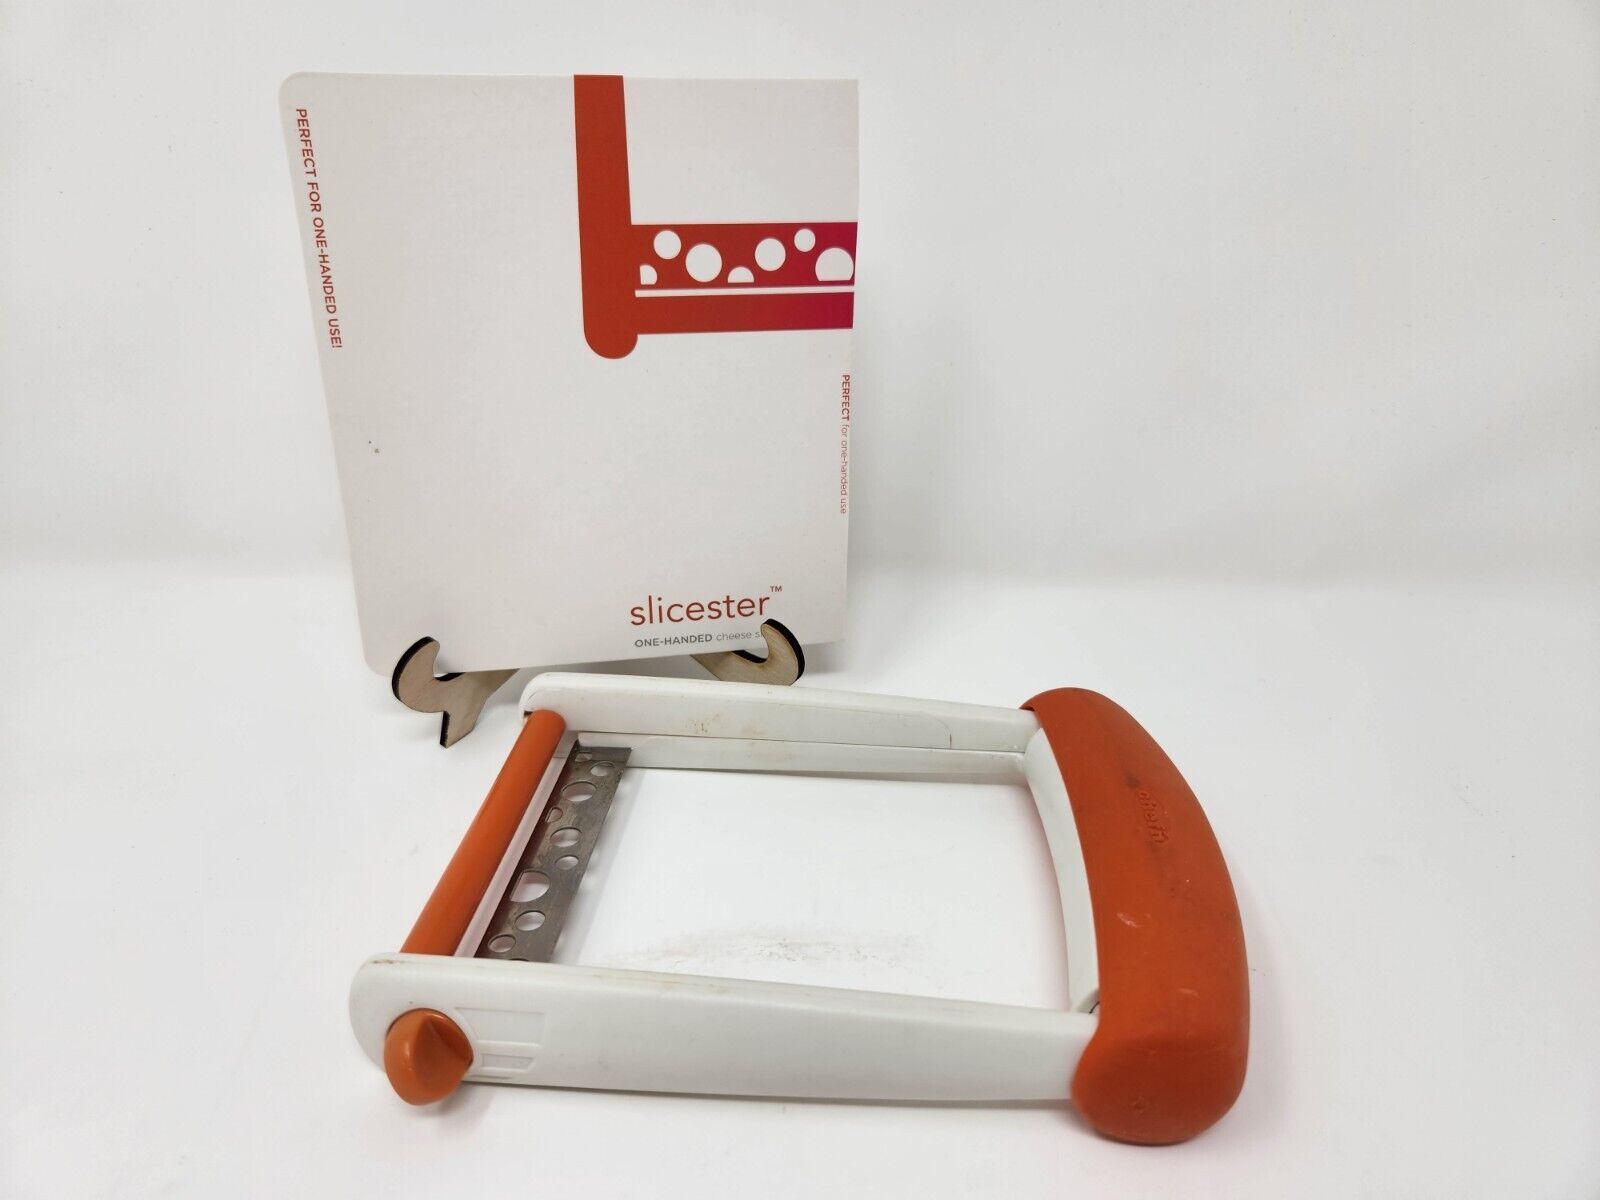 Chef'n Slicester Cheese Slicer (Apricot color) 3 Settings w Instruction Manual - $18.76